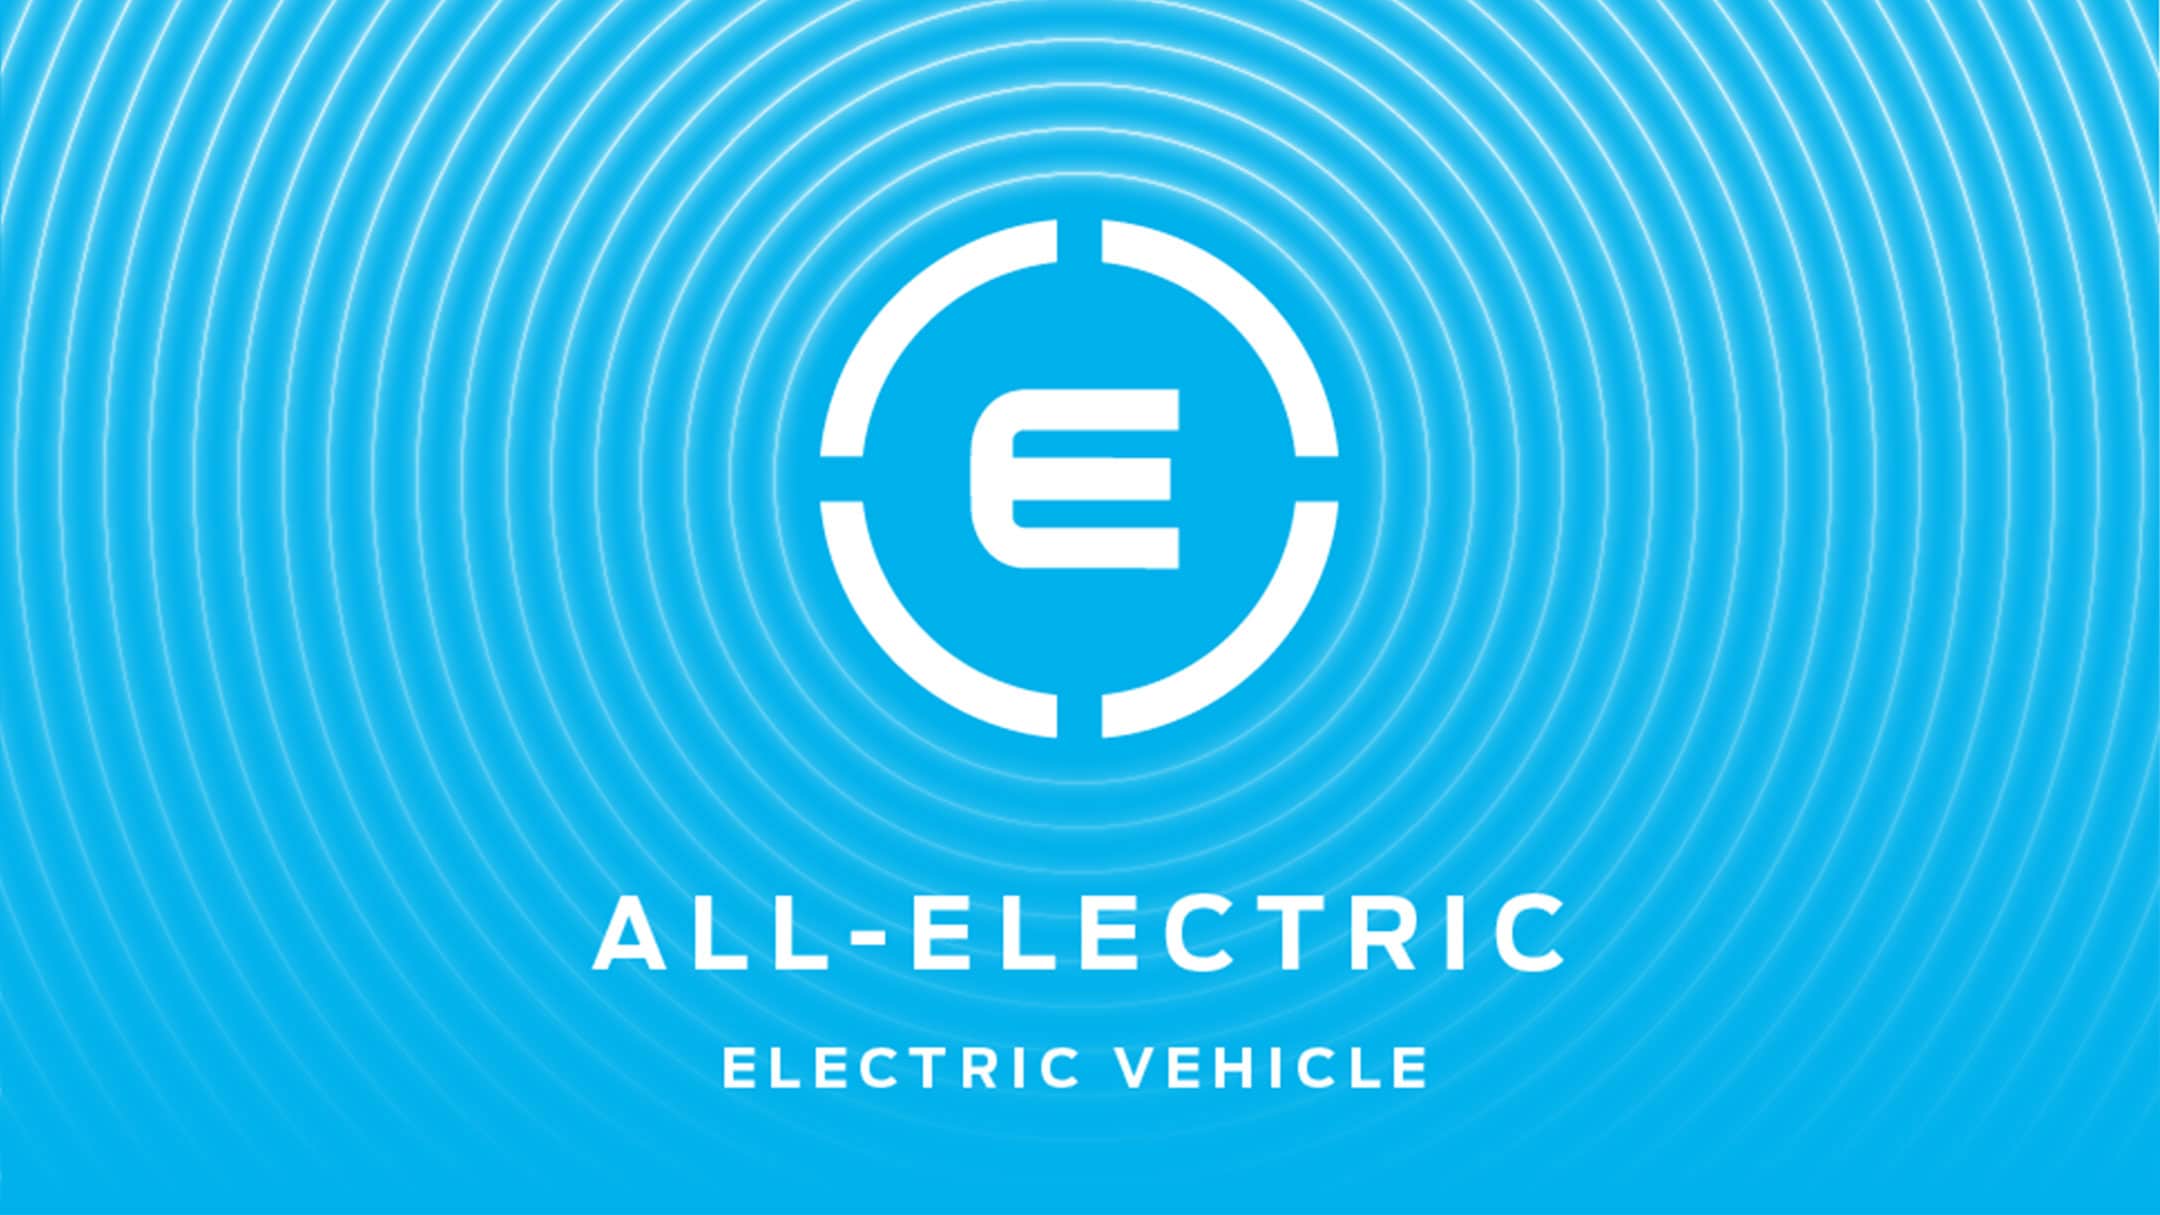 All-Electric electric vehicle icon